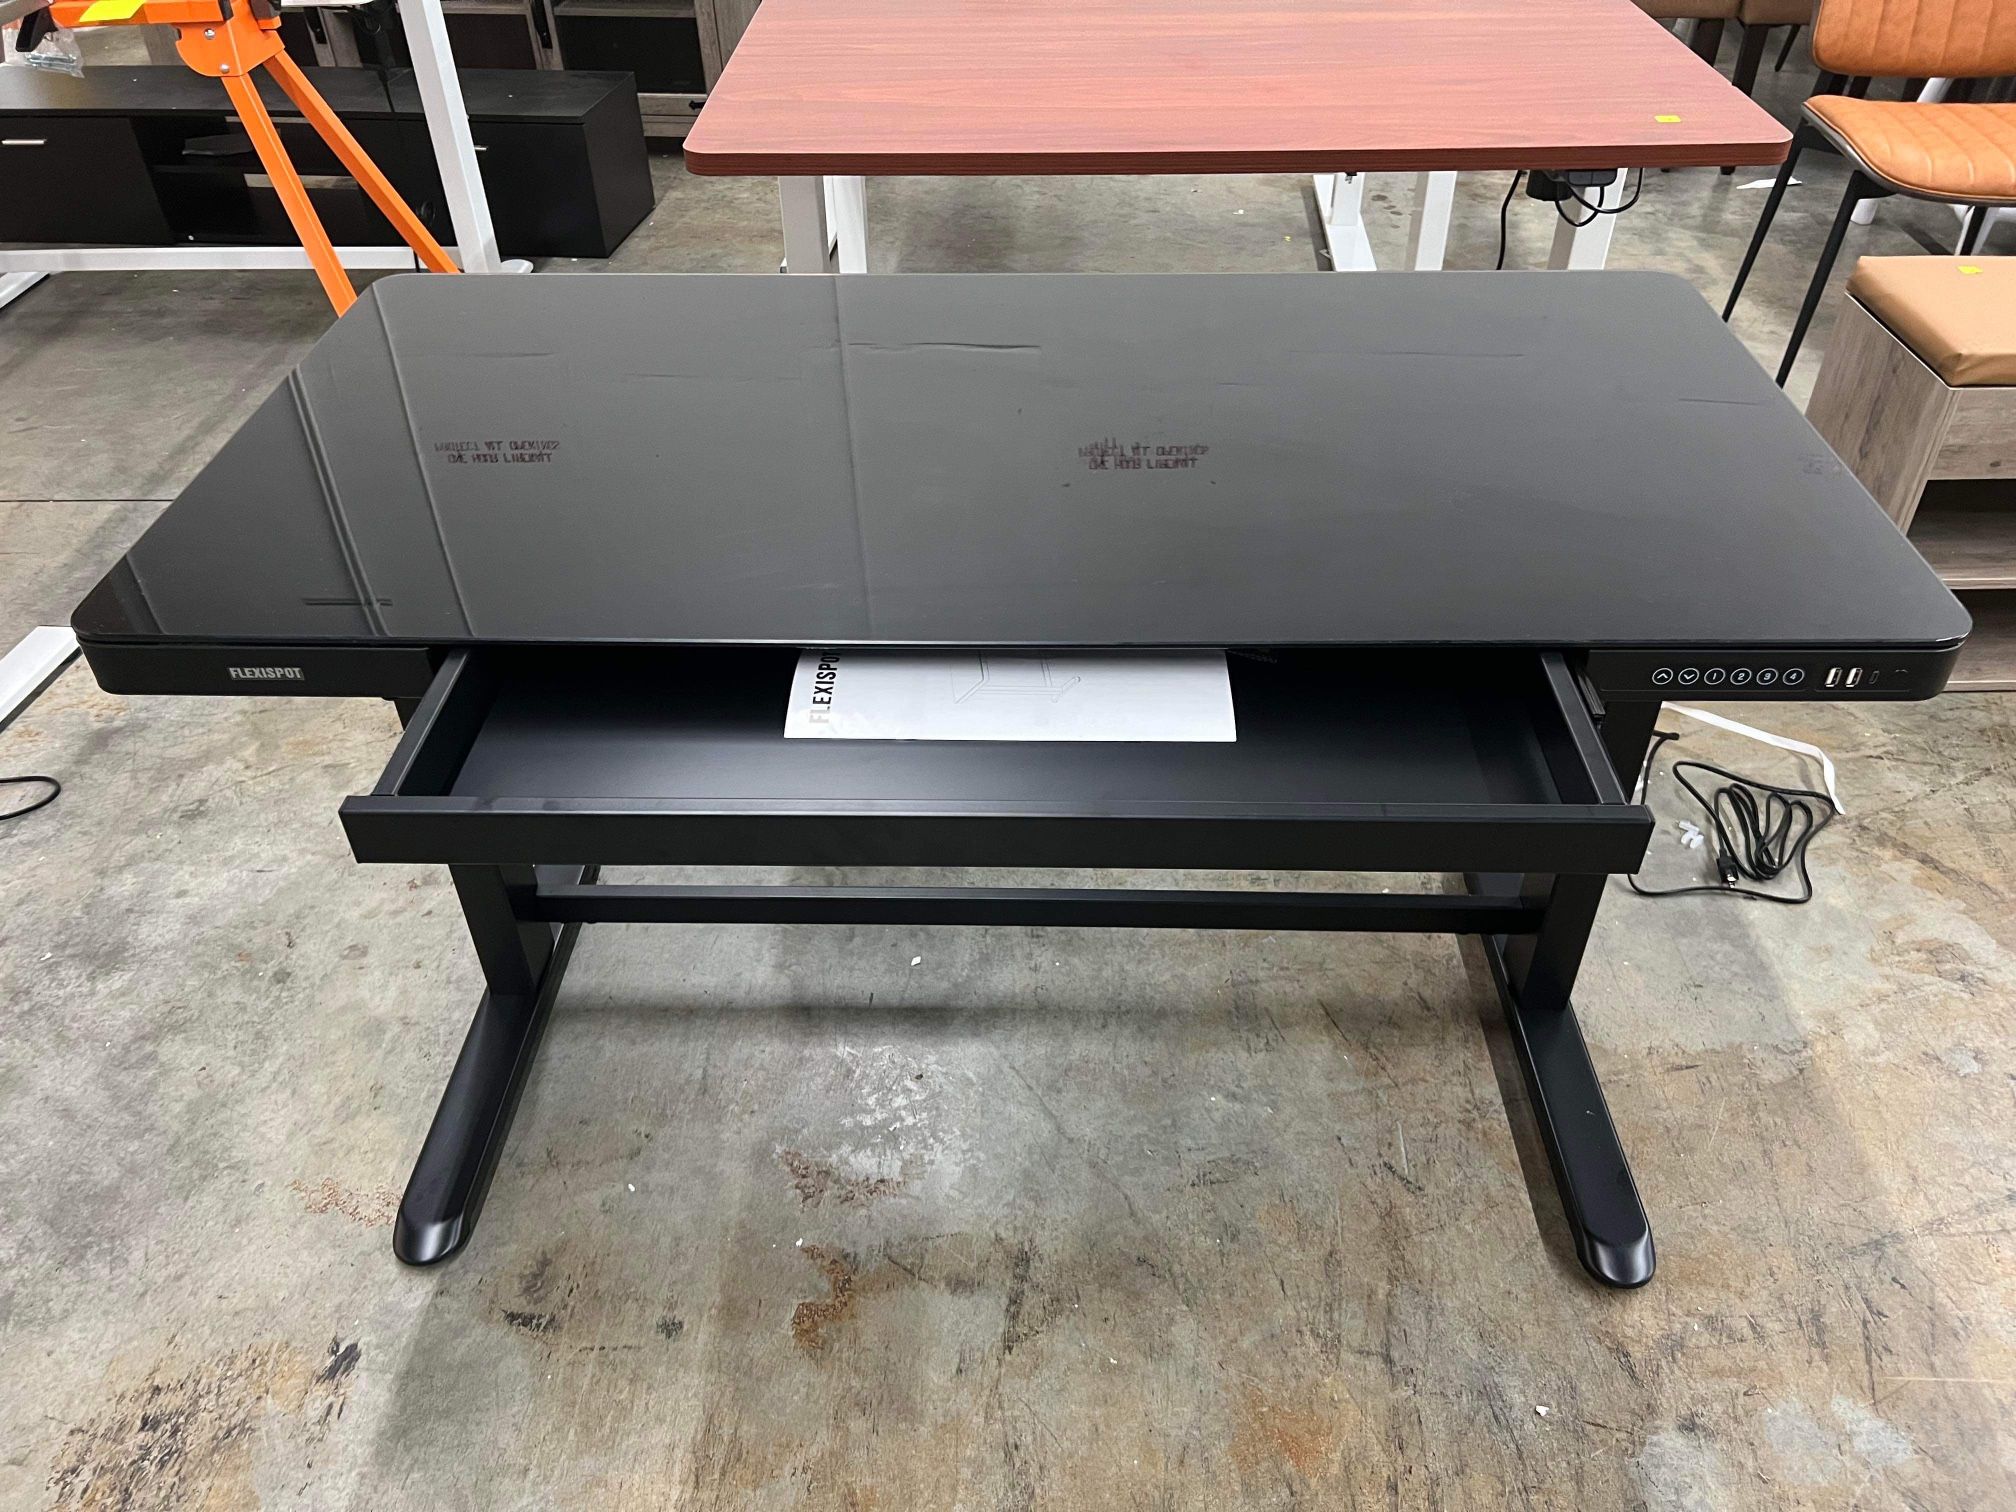 FLEXISPOT Comhar Electric Standing Desk with Drawer(glass top 48x24)